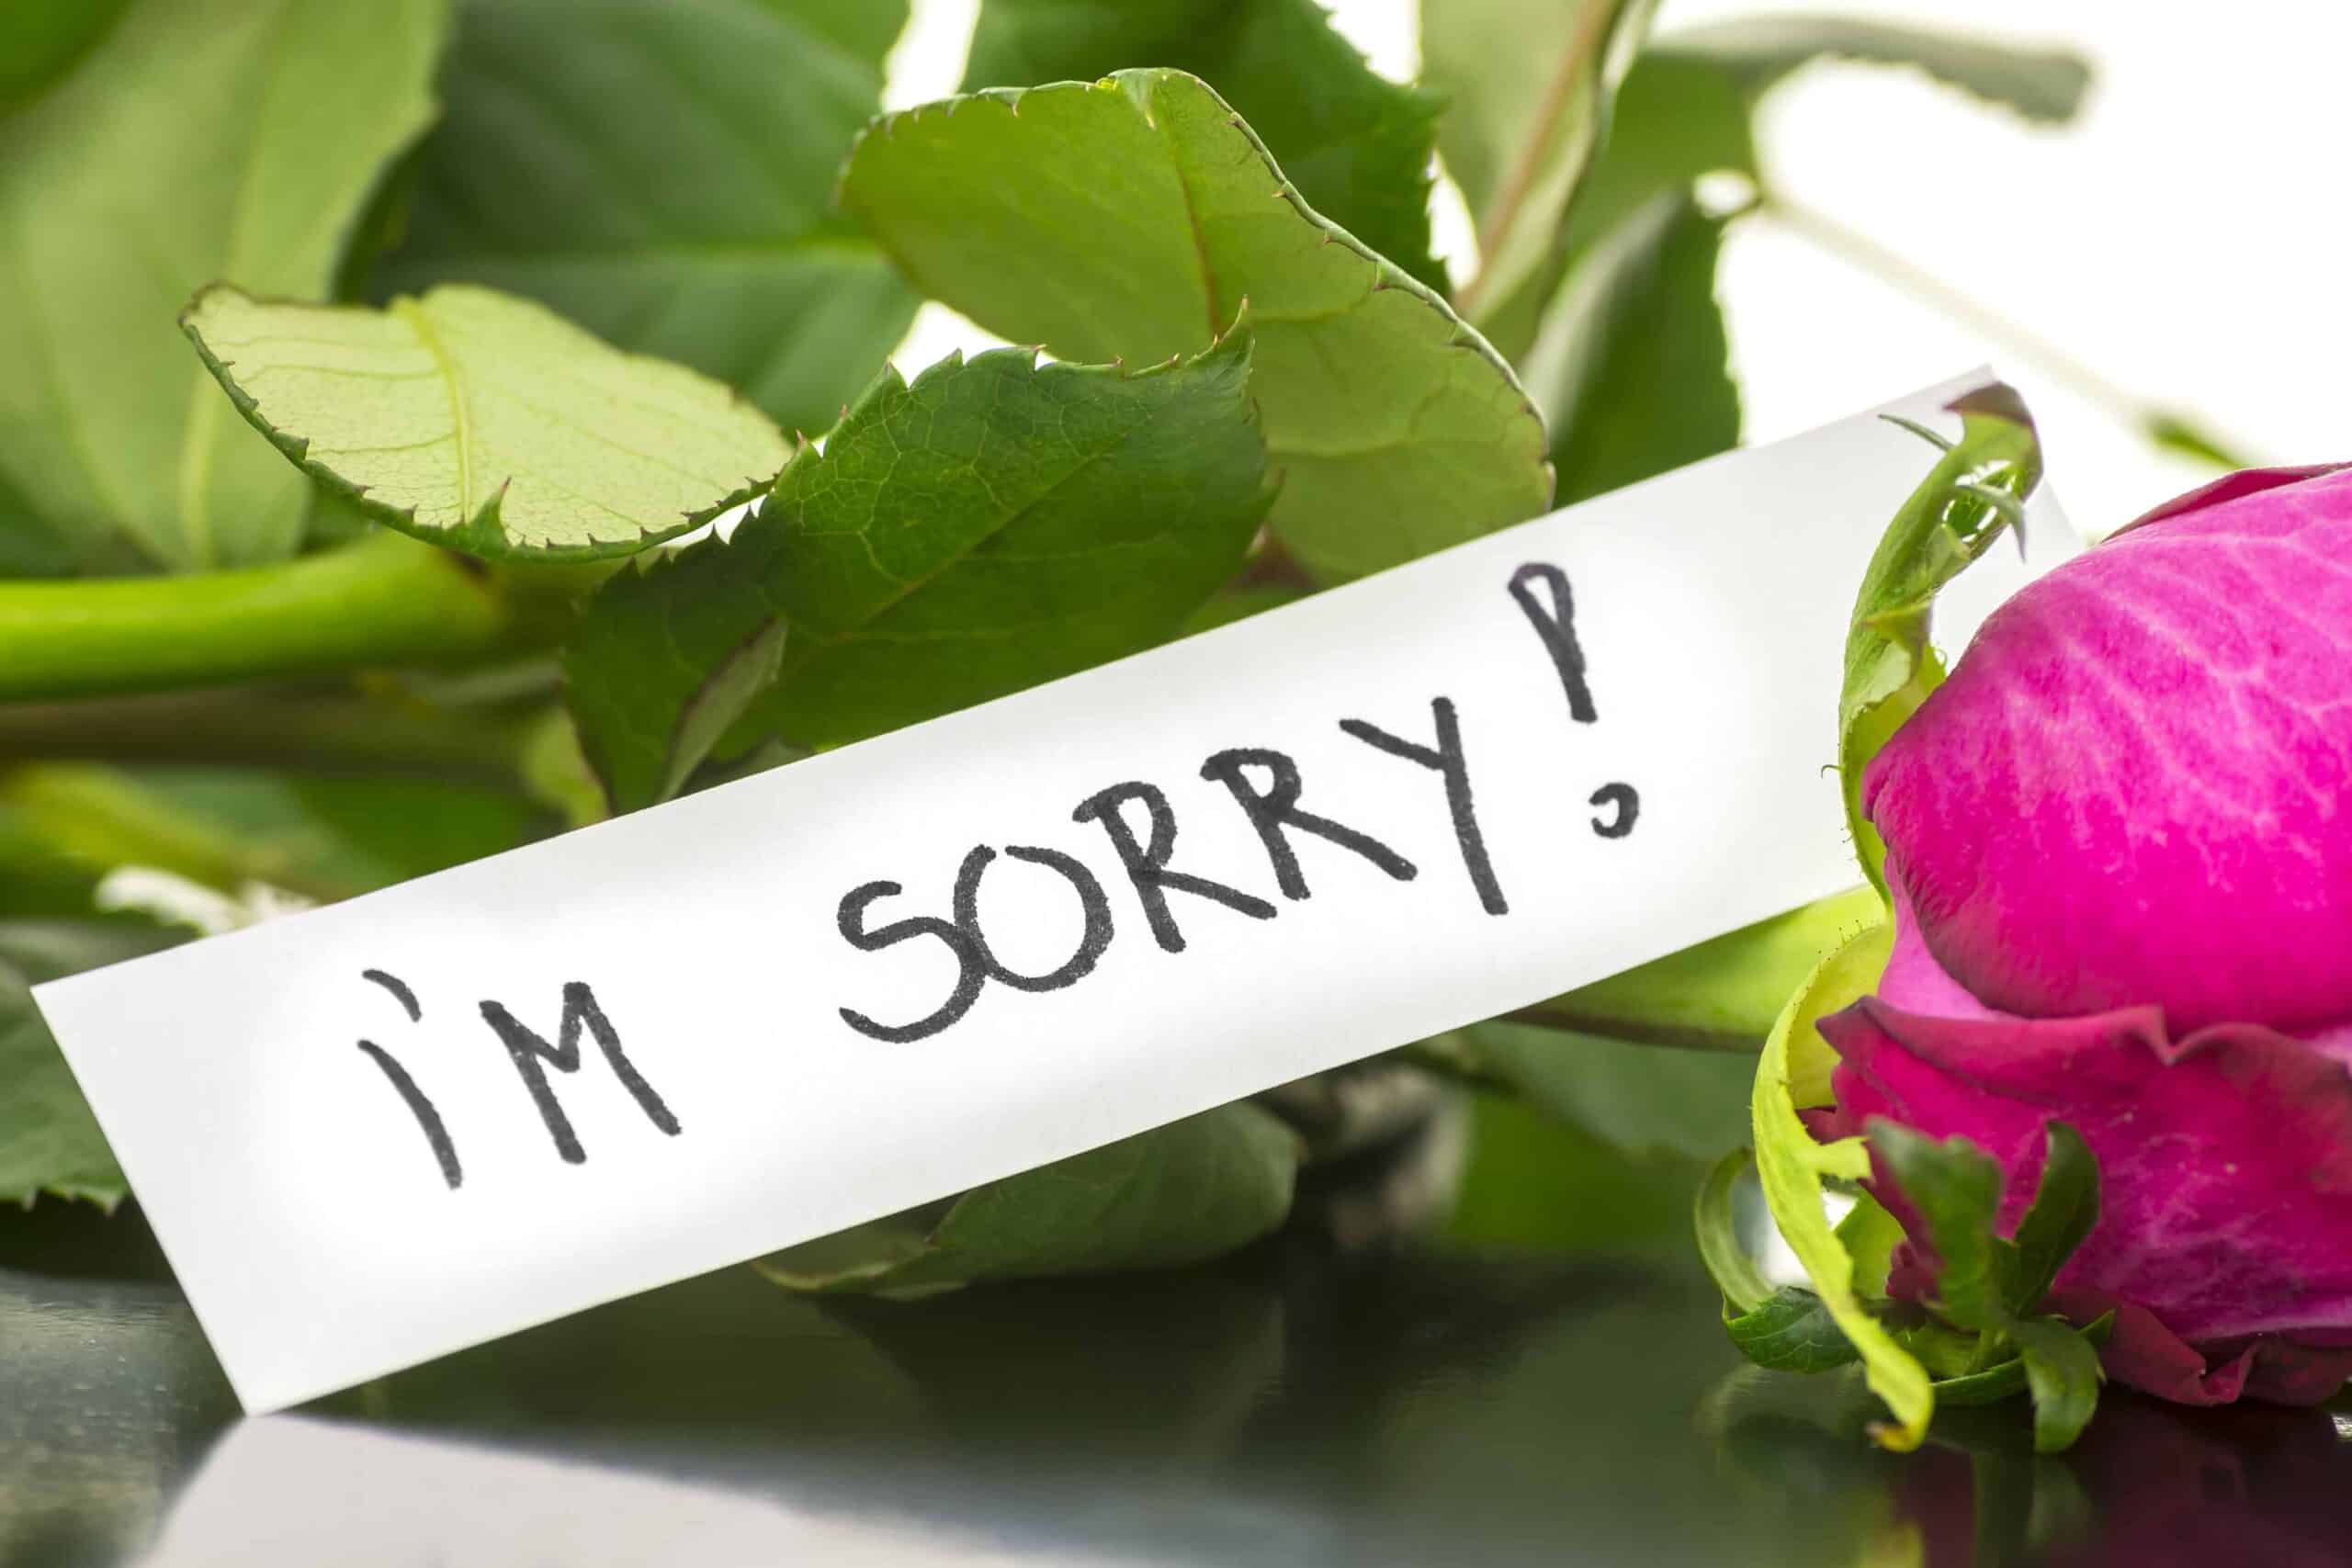 Words of apology to a friend